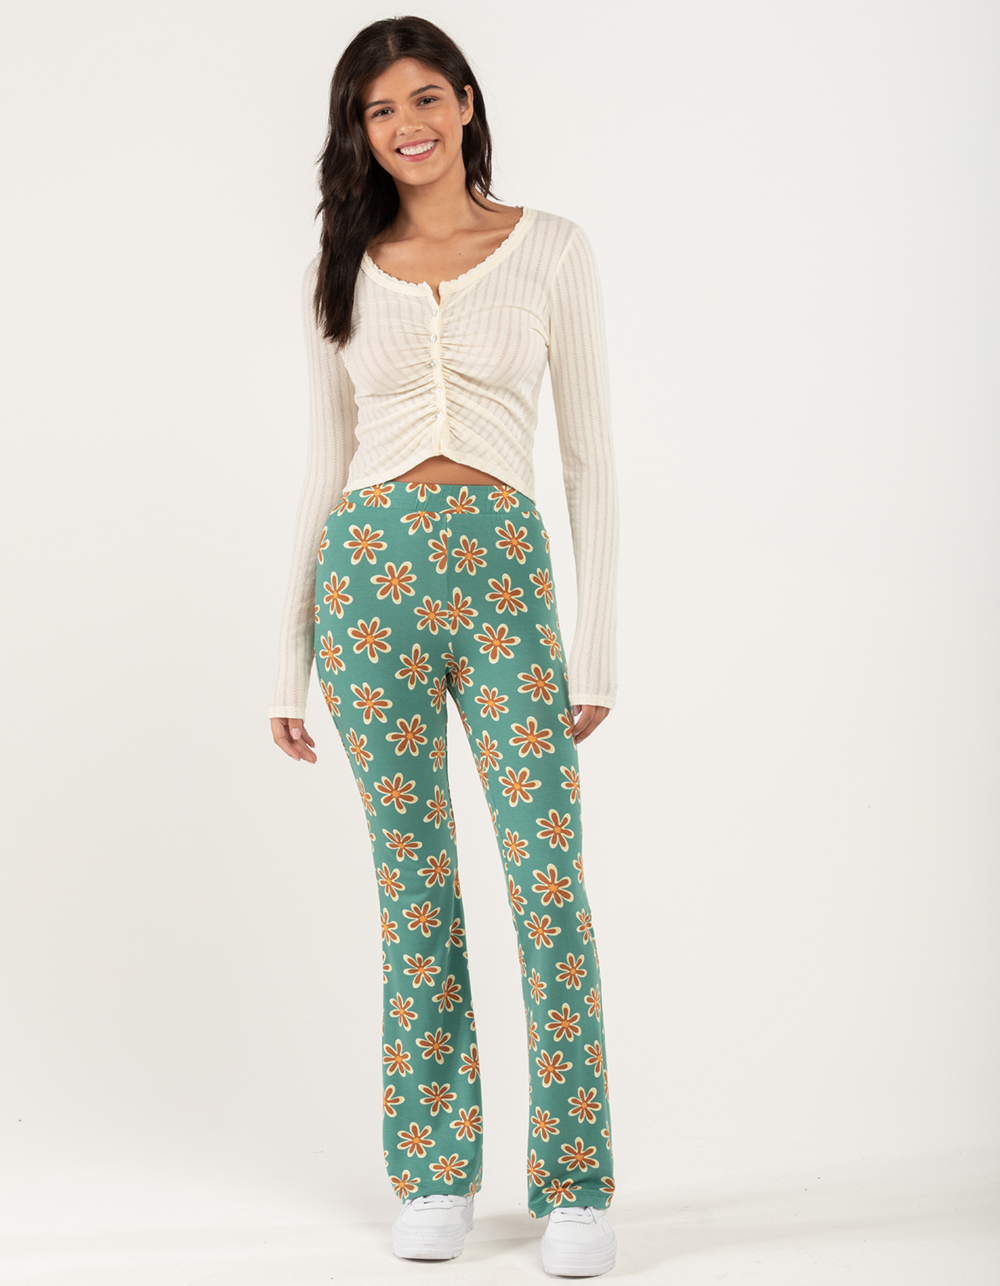 Women's Designer Printed Pants, Sale up to 70% off